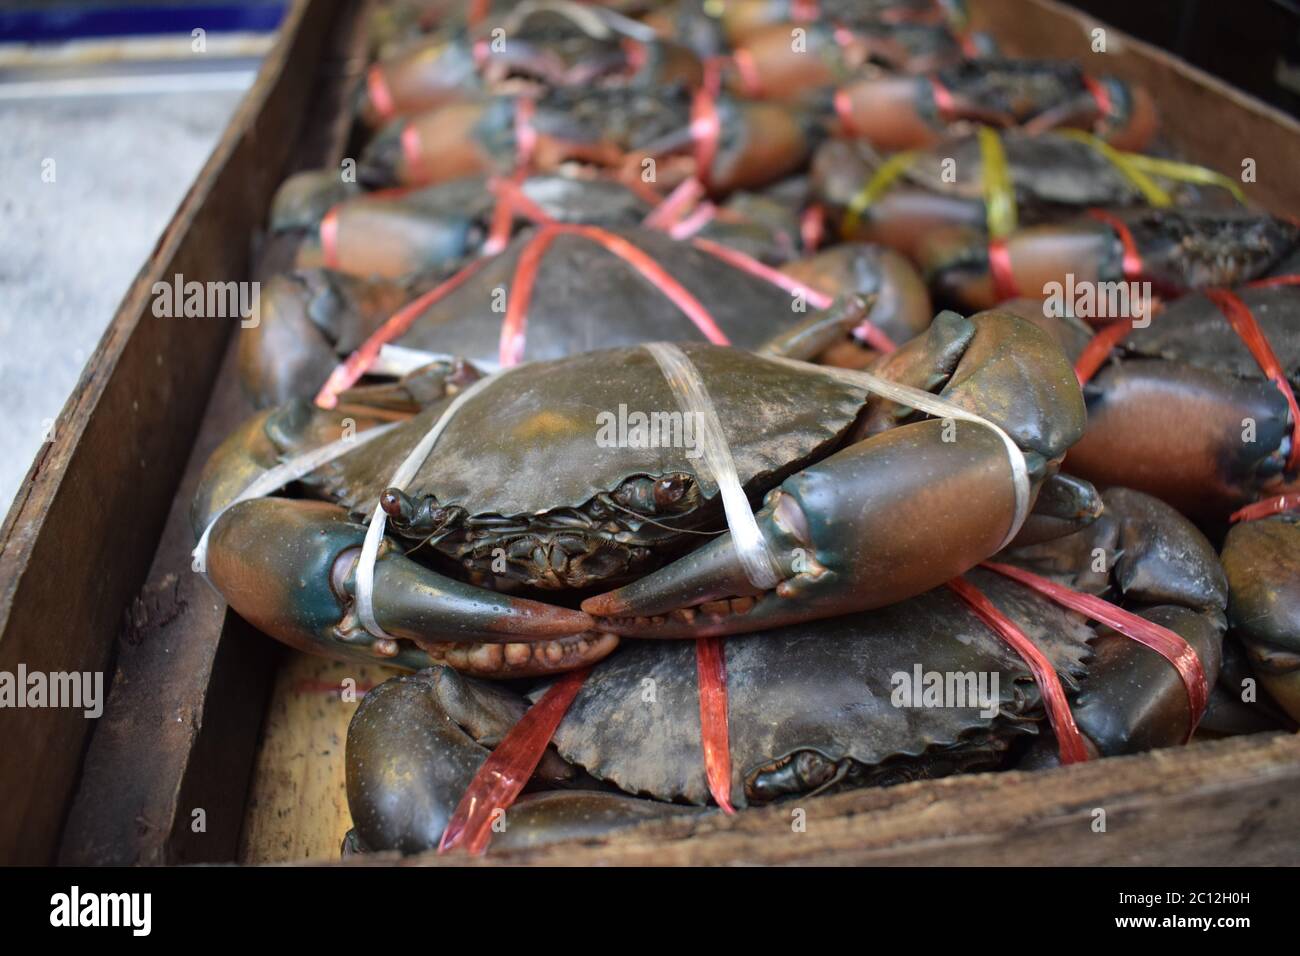 Tied sea crabs sold to restaurants to be cooked on a street market in Thailand Stock Photo